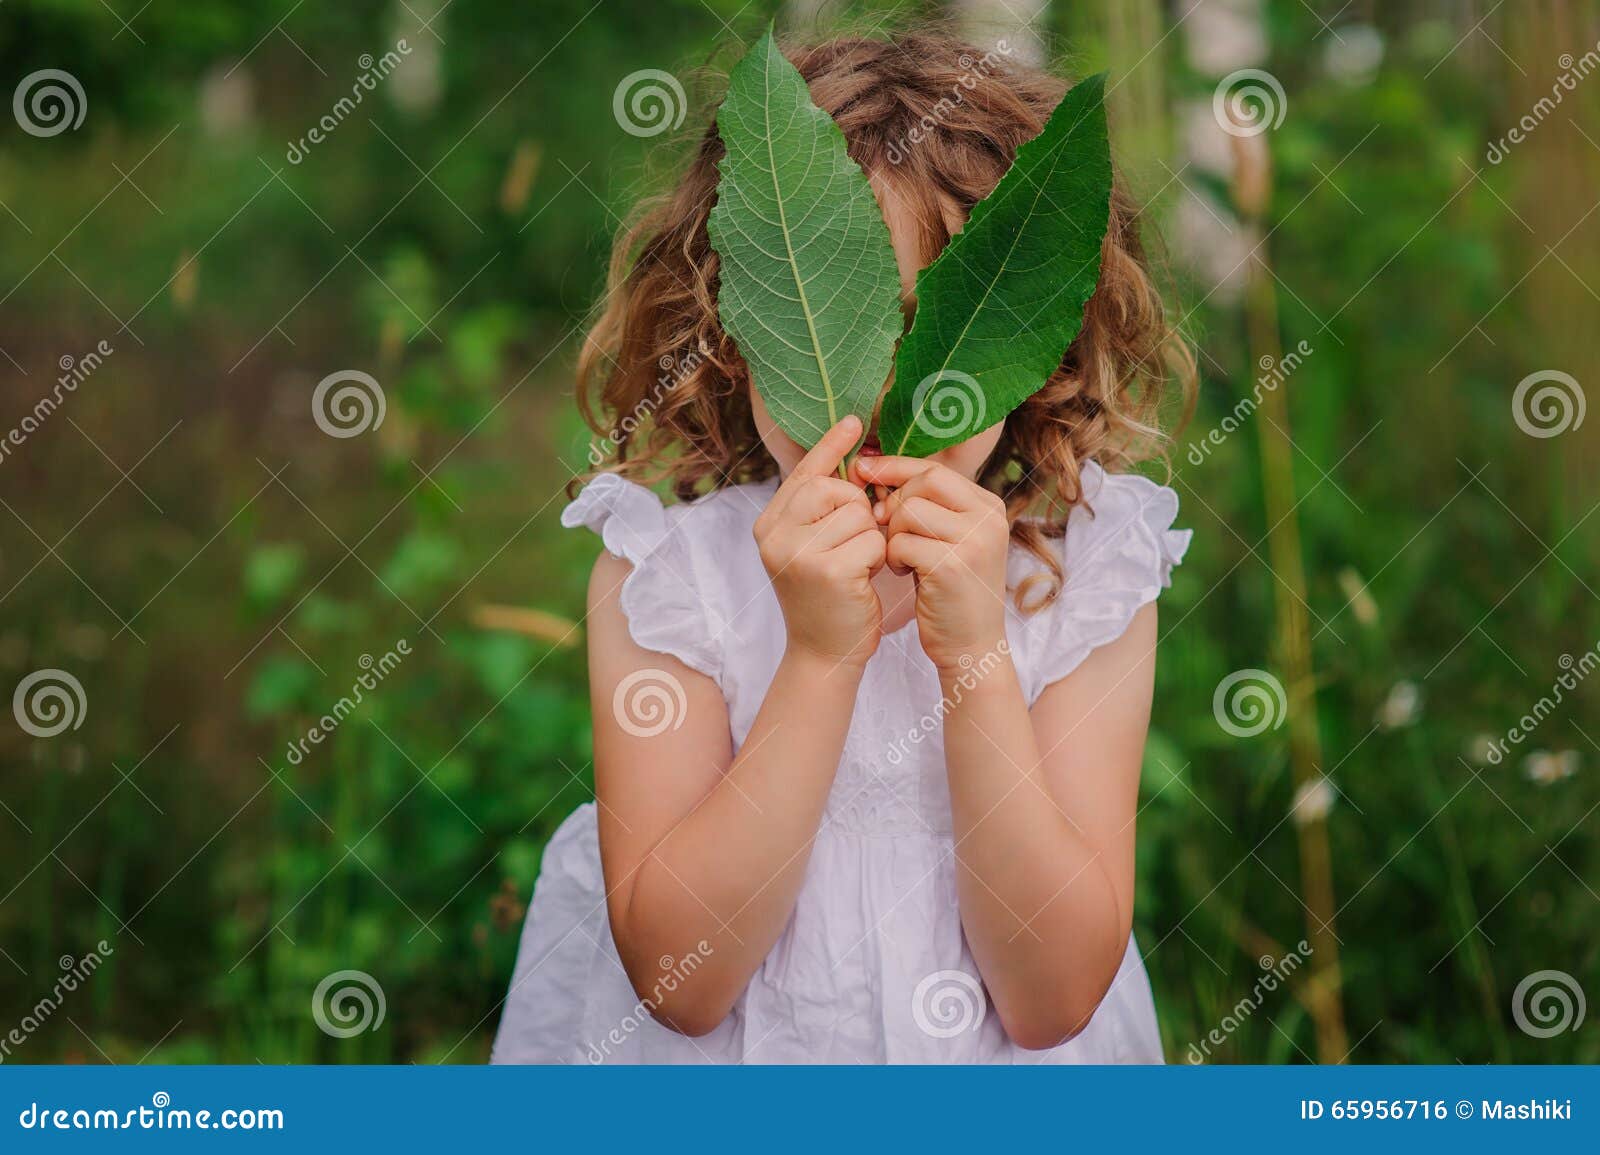 child girl playing with leaves in summer forest with birch trees. nature exploration with kids.